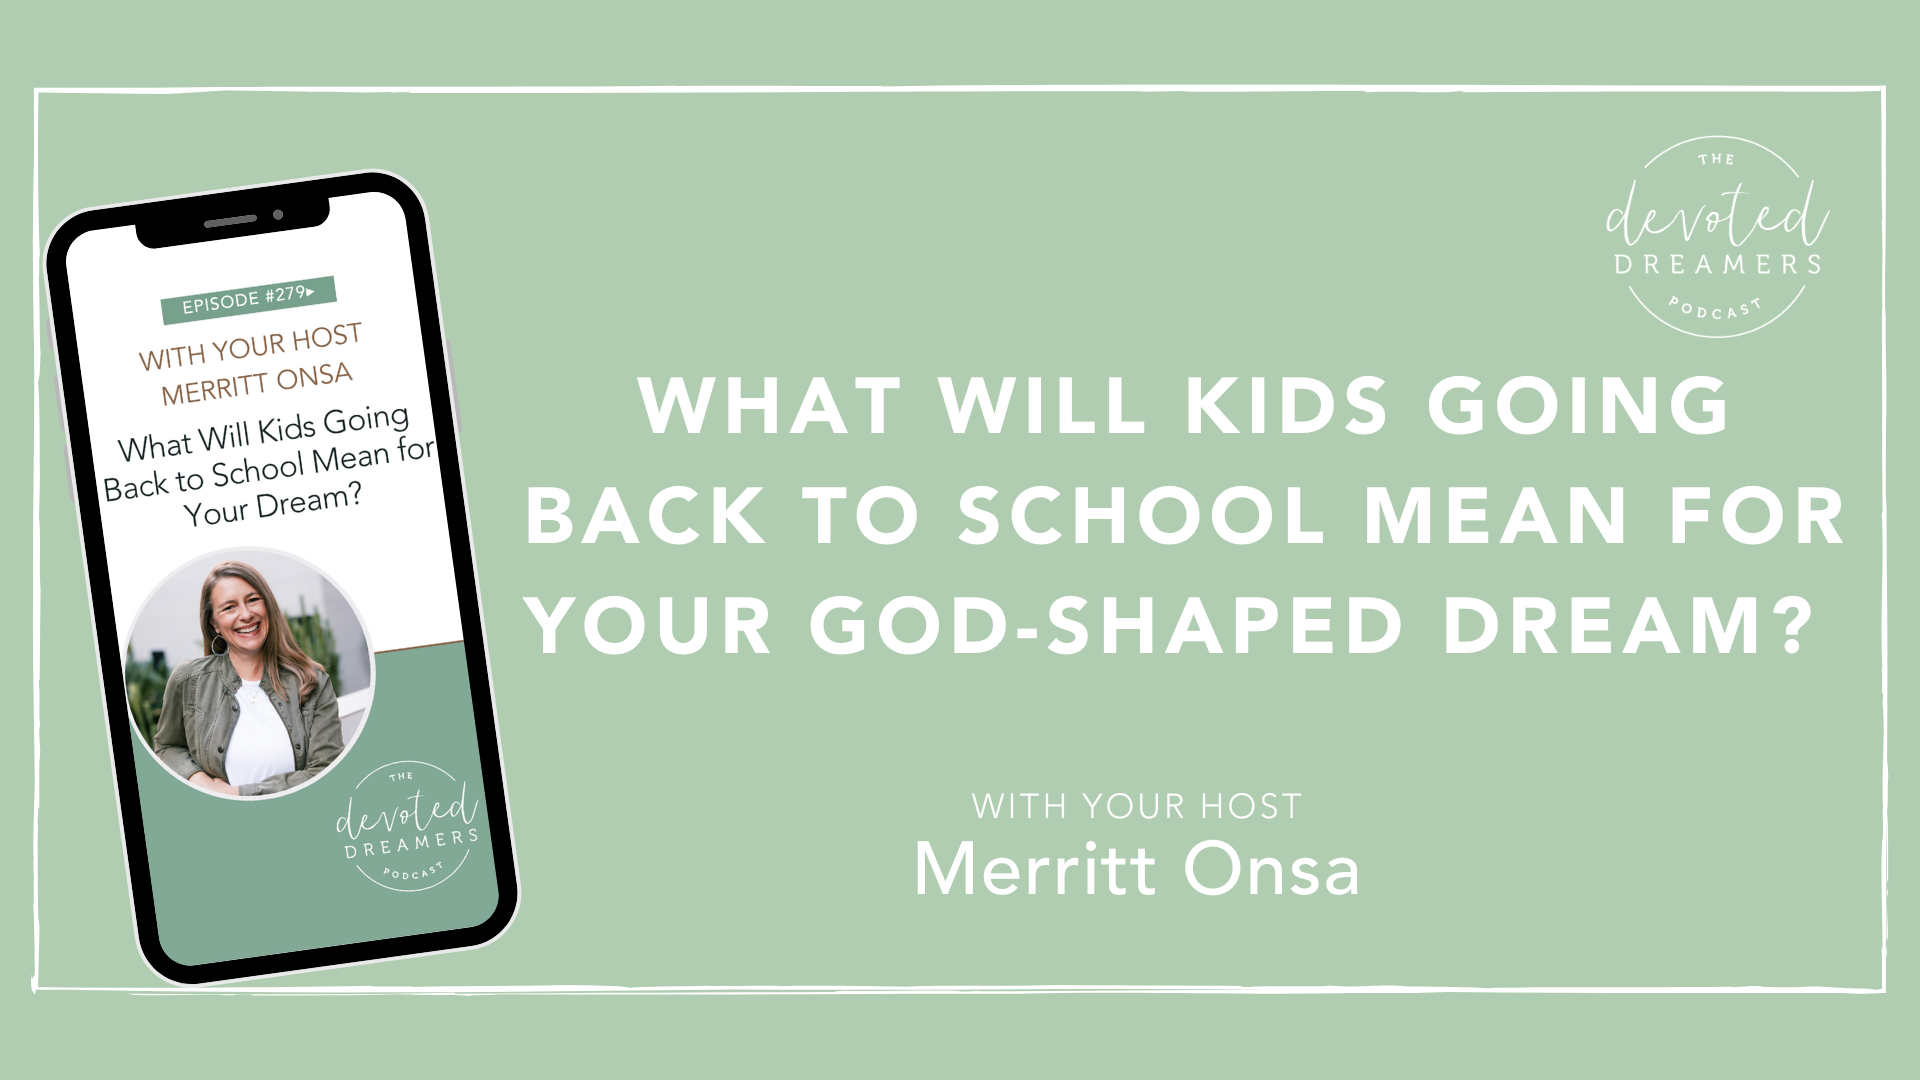 What Will Kids Going Back to School Mean for Your God-Shaped Dream